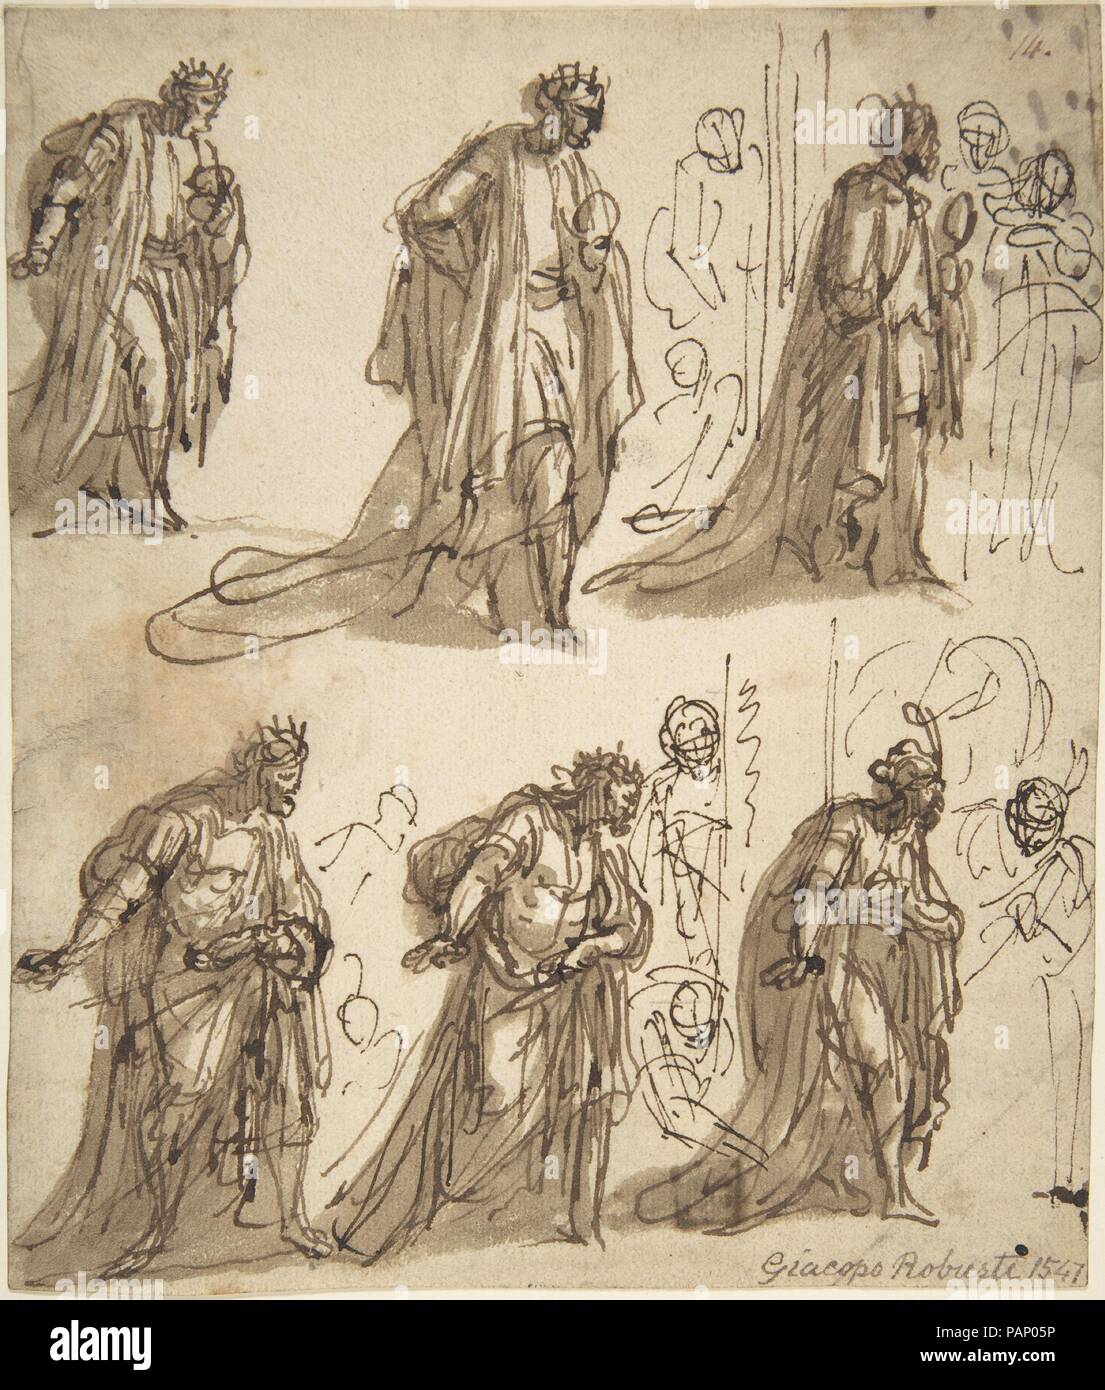 Six Studies of a King for an Adoration. Artist: Anonymous, Italian, Venetian, 16th century. Dimensions: 7 x 6 in.  (17.8 x 15.2 cm). Date: 16th century. Museum: Metropolitan Museum of Art, New York, USA. Stock Photo